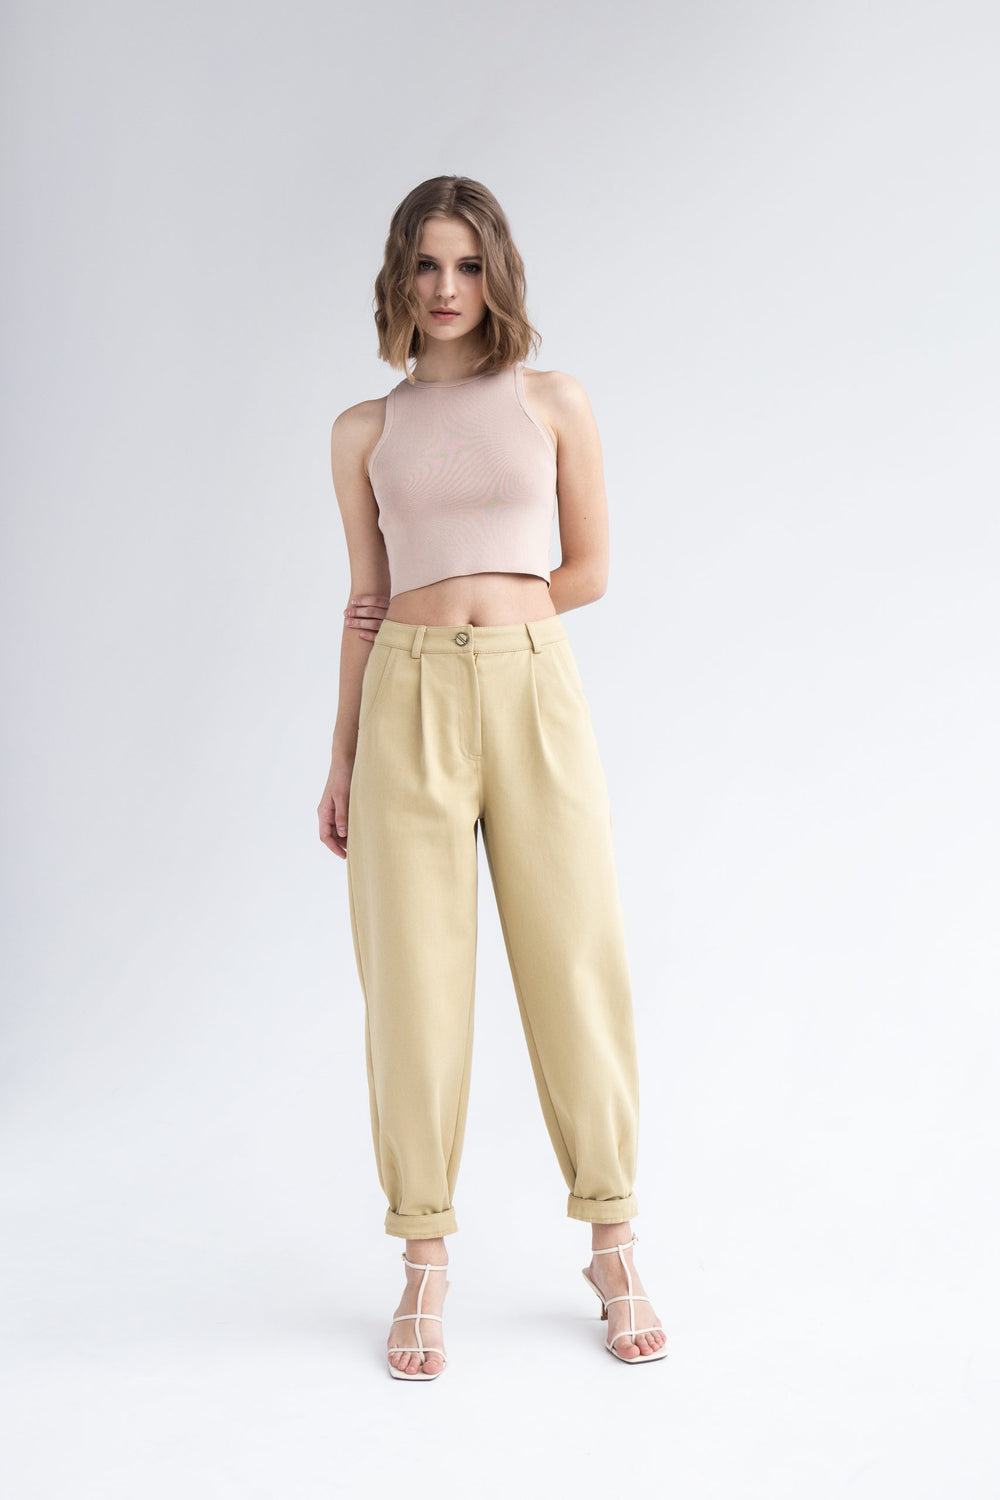 Woman wearing the Britney Pants sewing pattern from Vikisews on The Fold Line. A trouser pattern made in cotton, heavy corduroy, denim or twill fabrics, featuring a loose-fit banana style, front pockets, front waistline tucks fly front zip, back yoke, bac